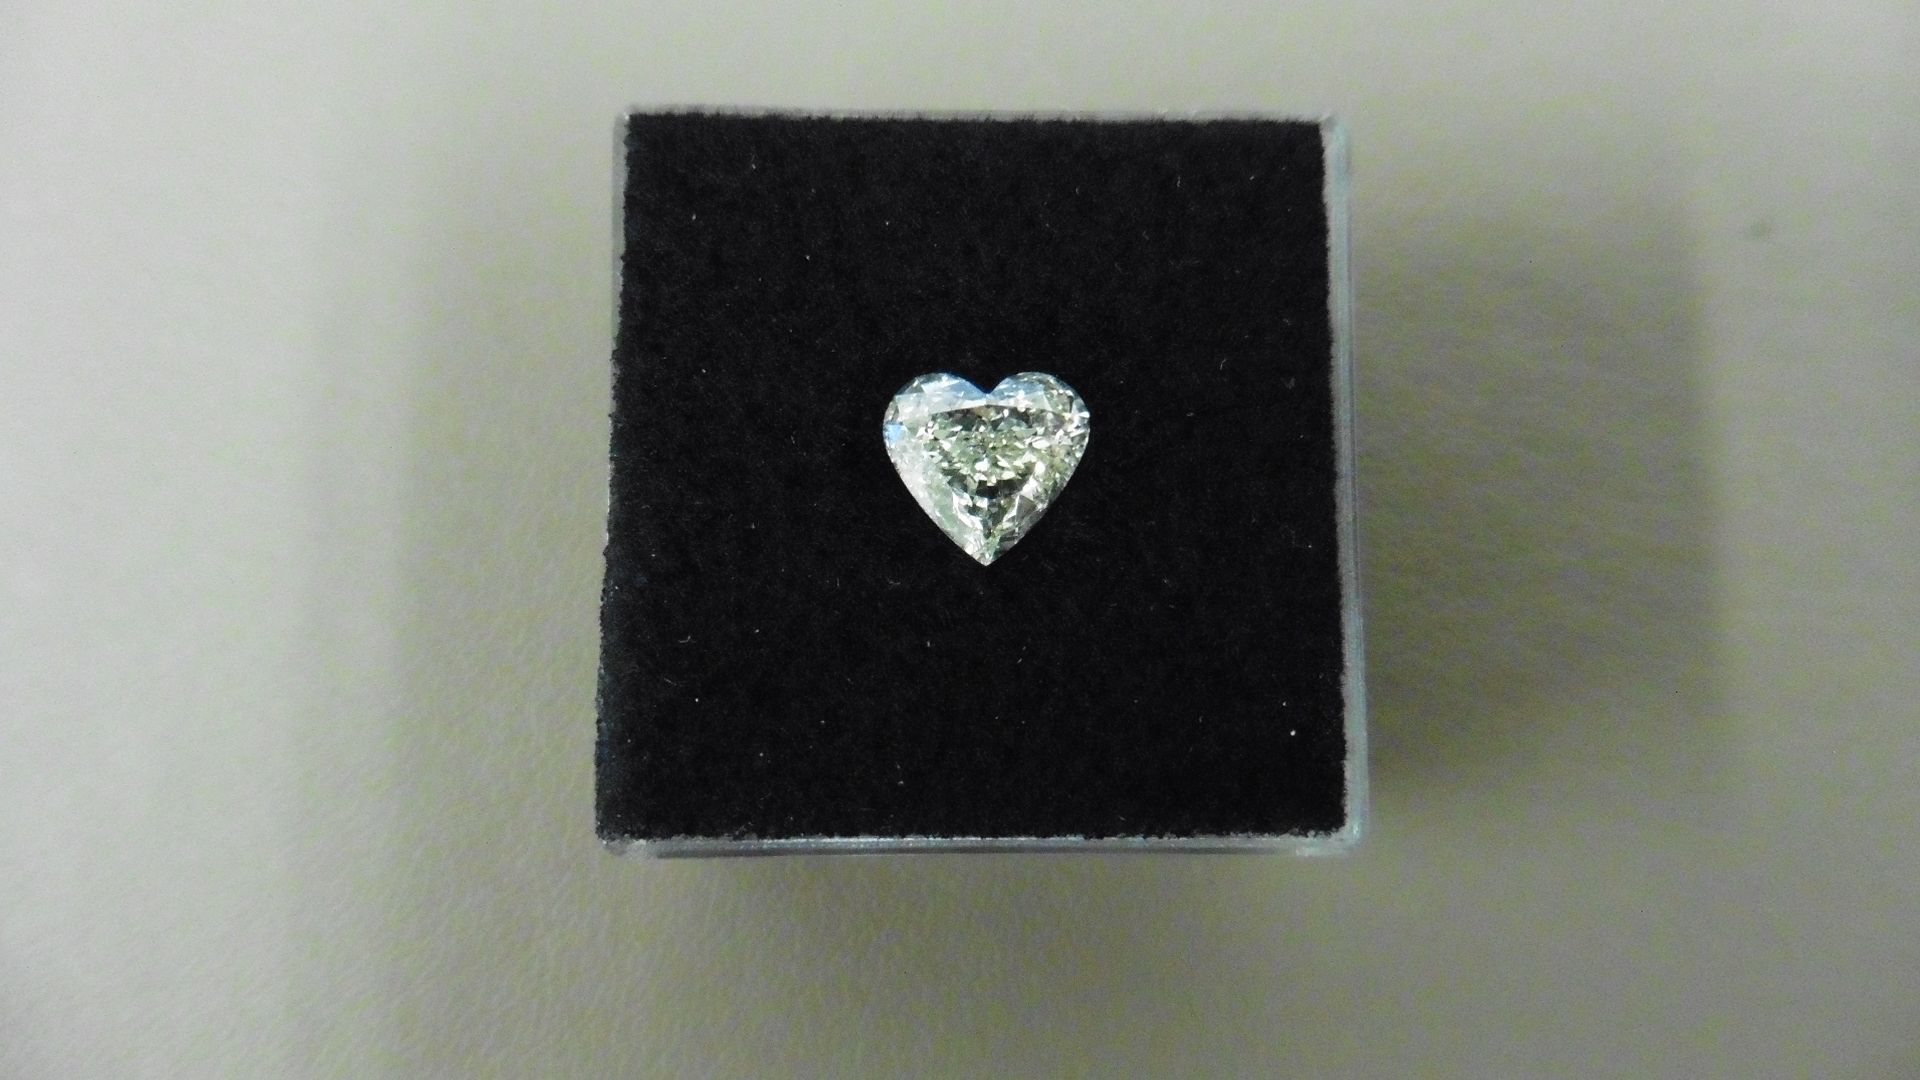 0.91ct heart shaped diamond, loose stone.J colour and Si clarity. No certification but can be done - Bild 5 aus 6